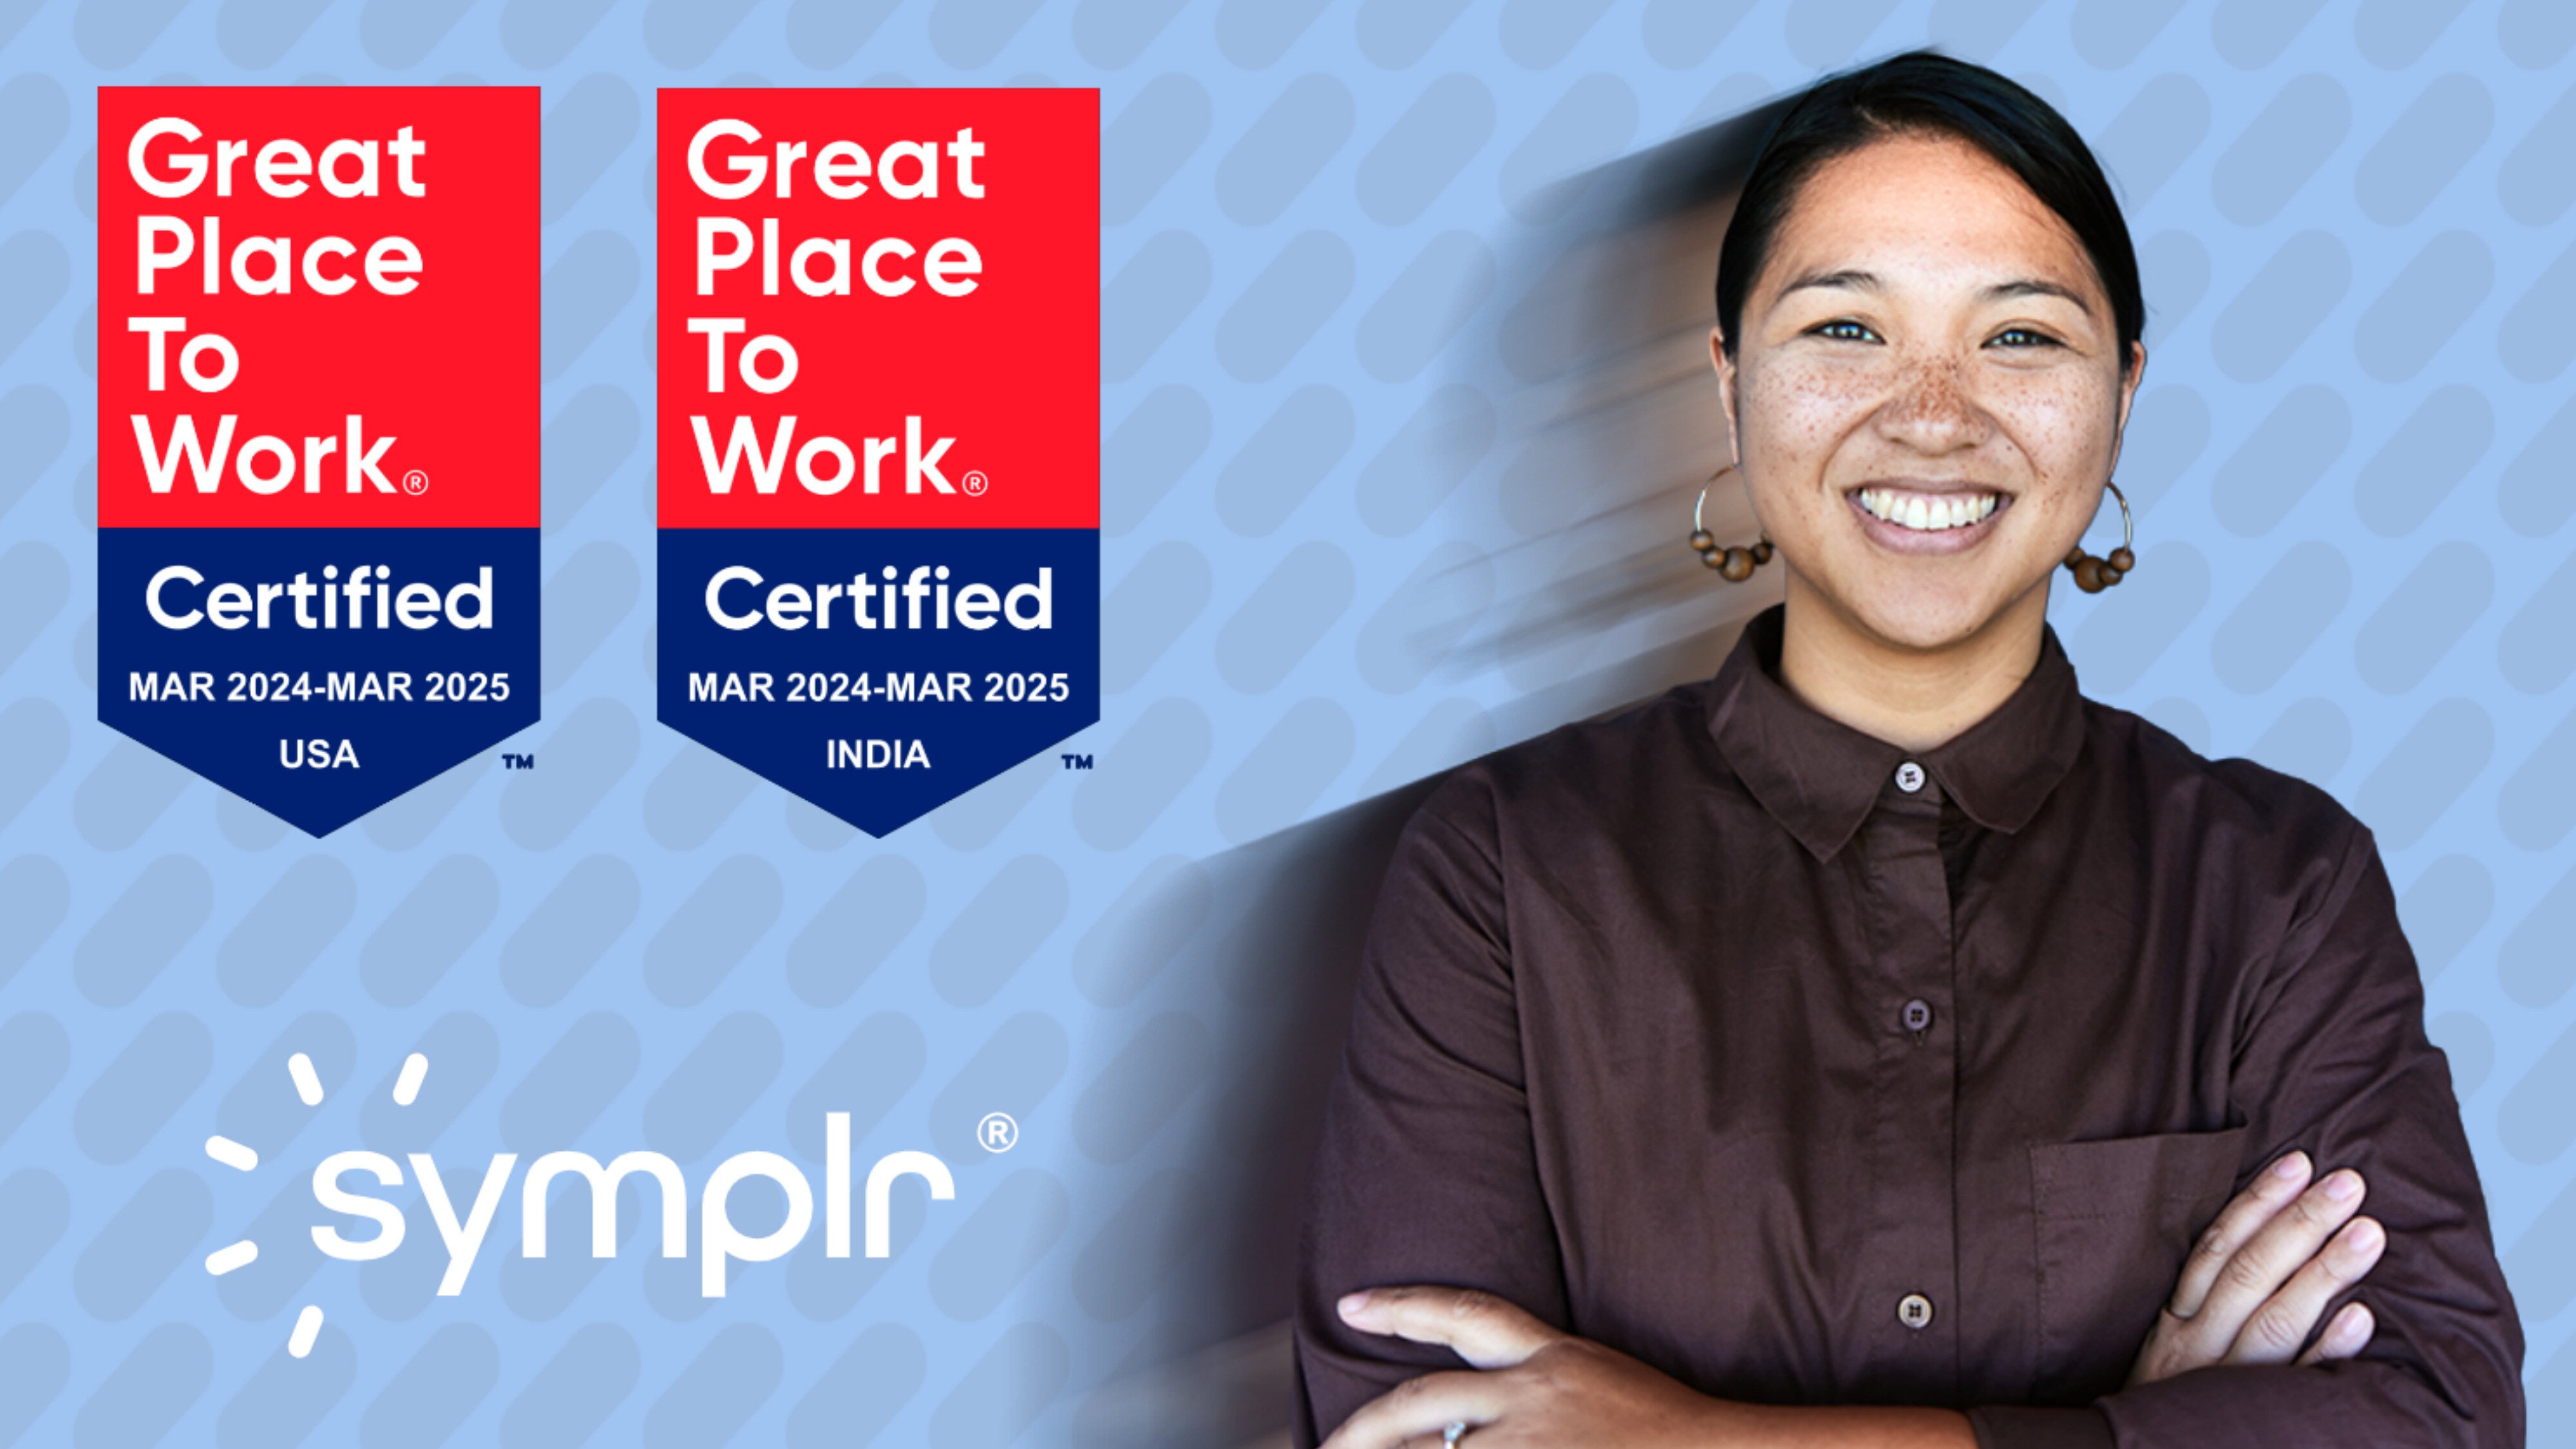 symplr earns Great Place To Work Certification